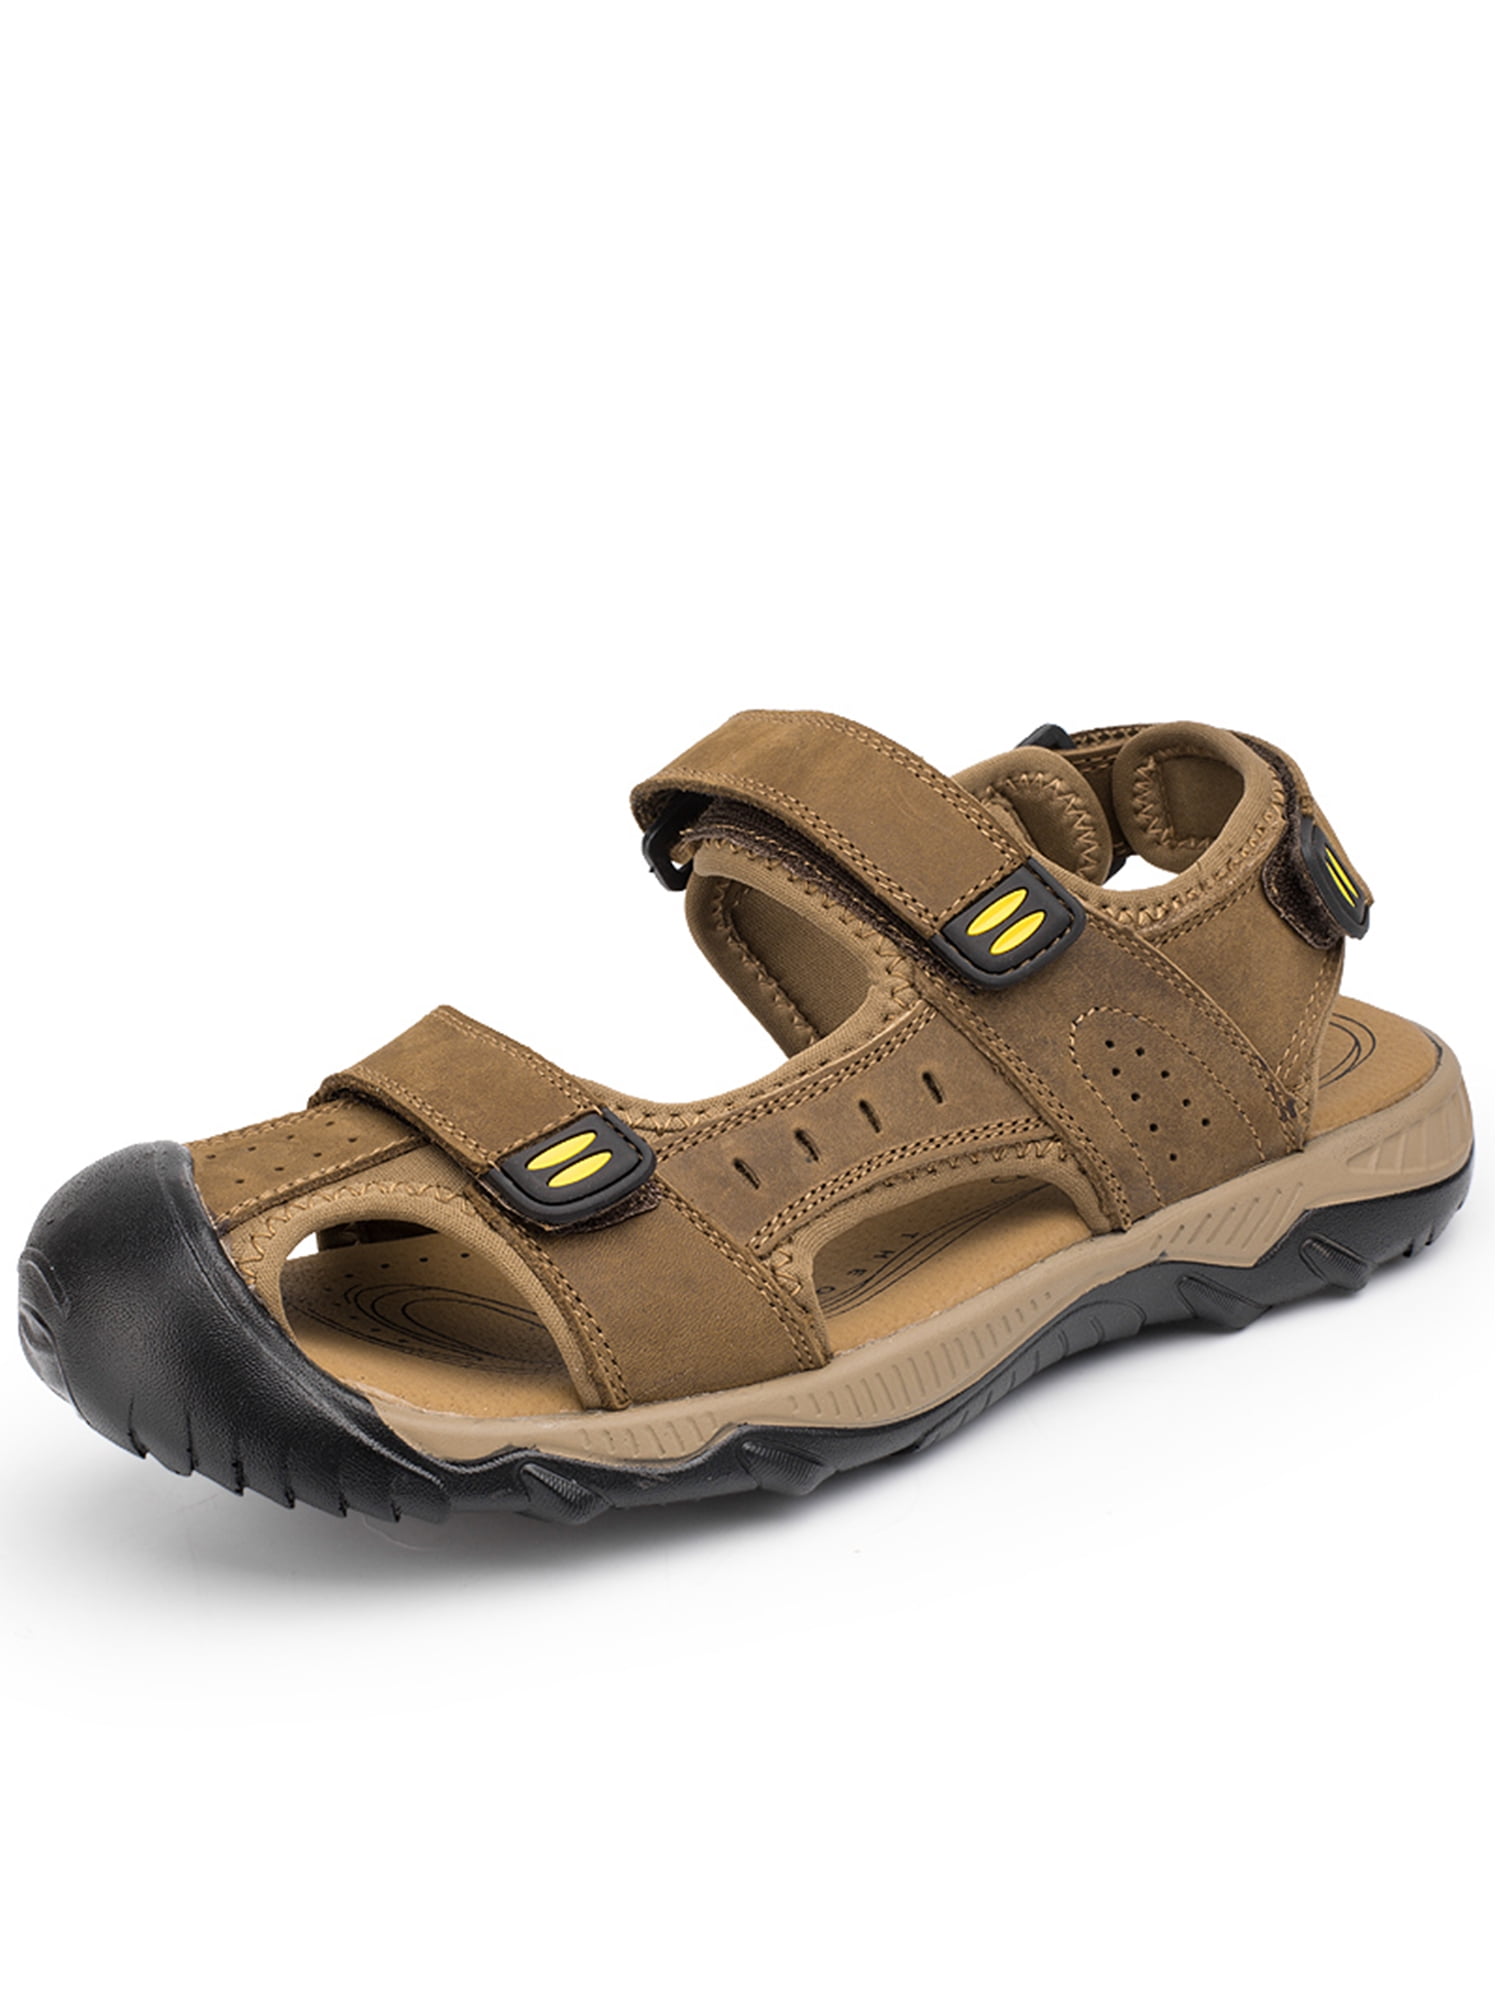 visionreast Mens Outdoor Sport Sandals Closed-Toe Leather Summer Beach Sandals with Velcro,Hiking/Walking/Fishing